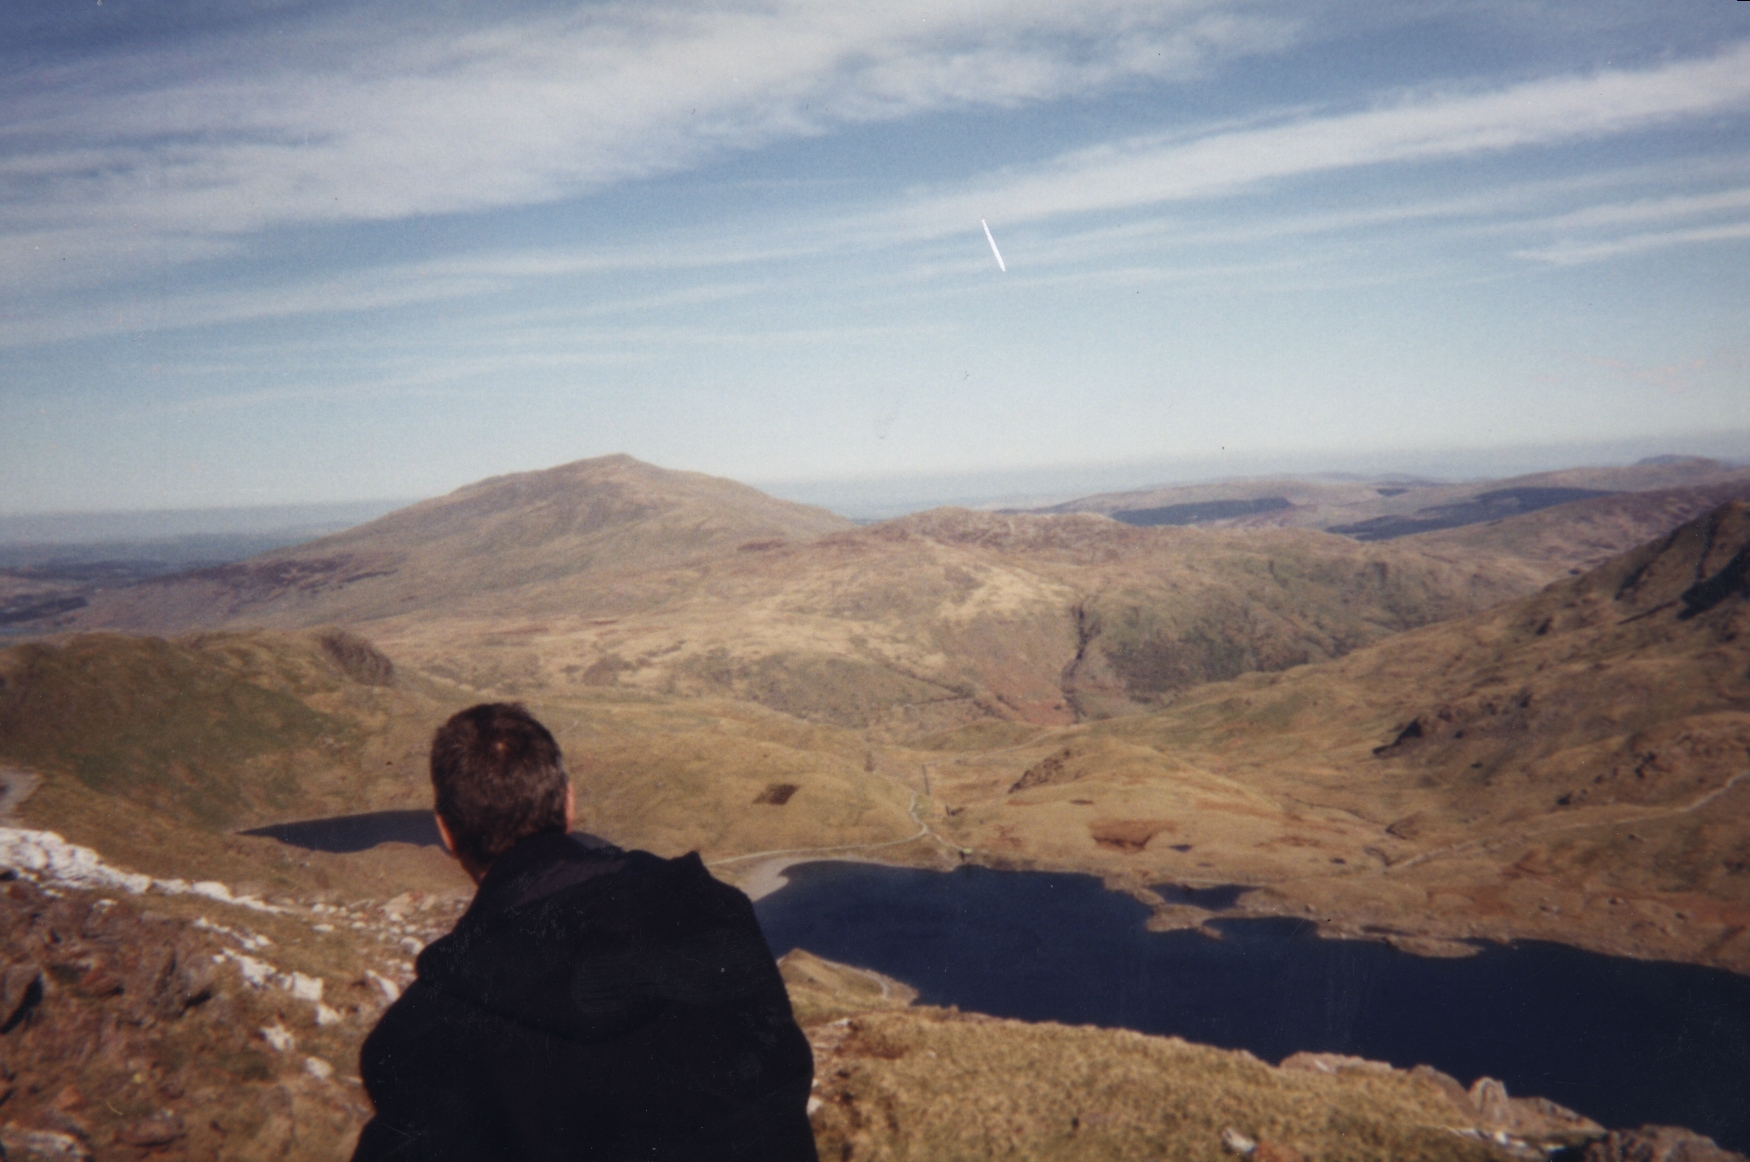 Standing on a hill high above a lake, a man looks out over the beautiful mountainous scenery of Snowdonia, under a blue sky with wispy clouds.